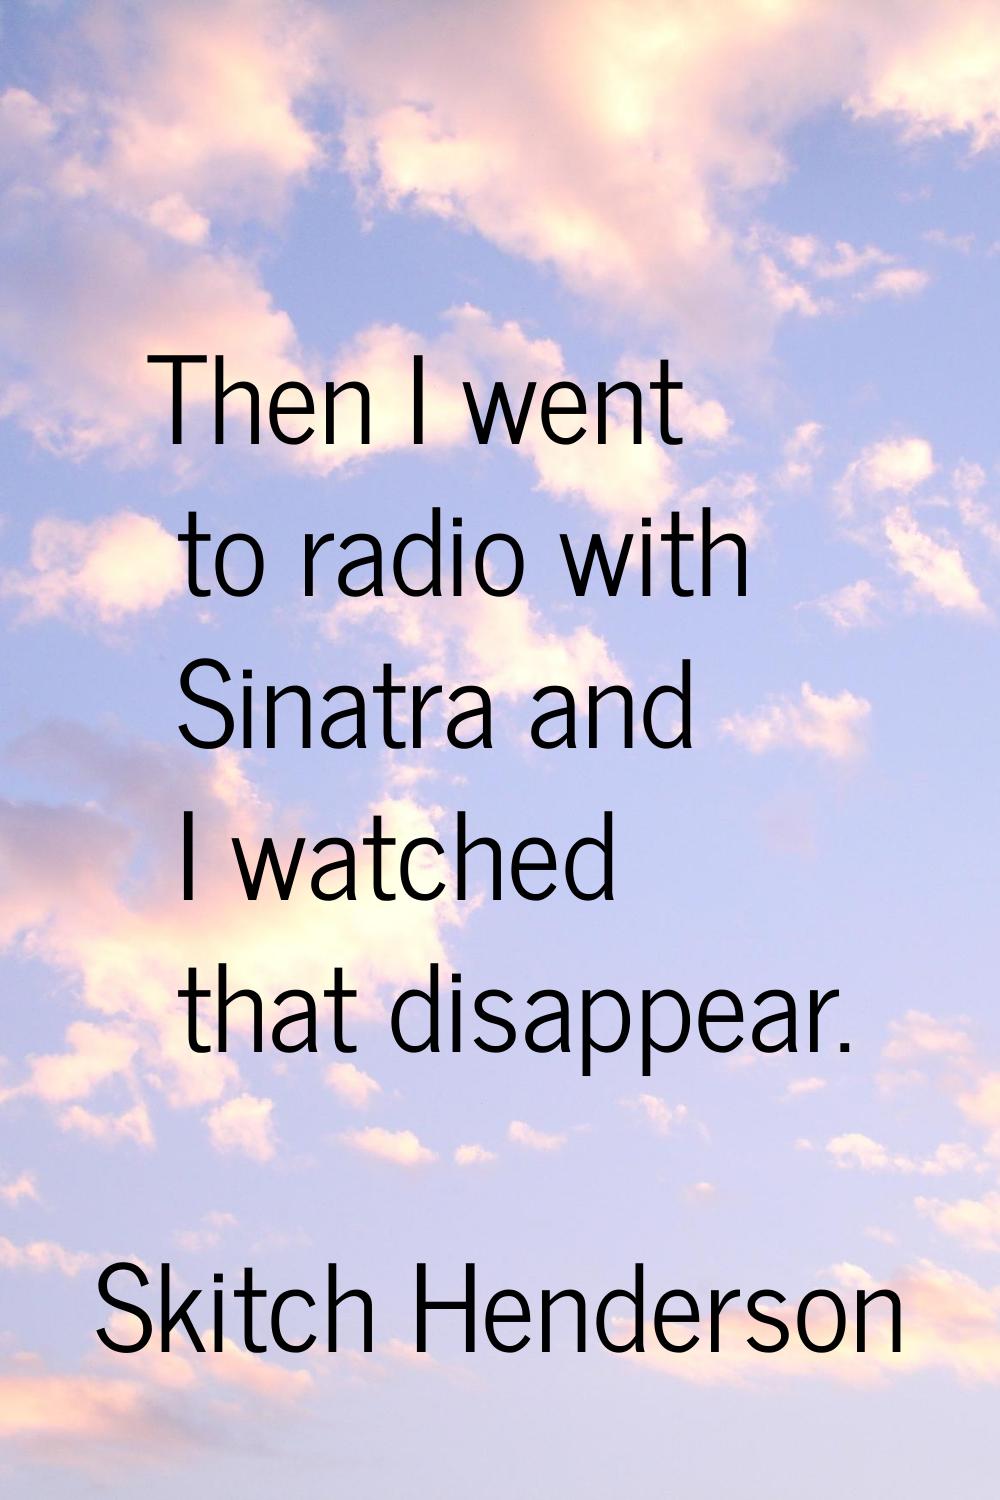 Then I went to radio with Sinatra and I watched that disappear.